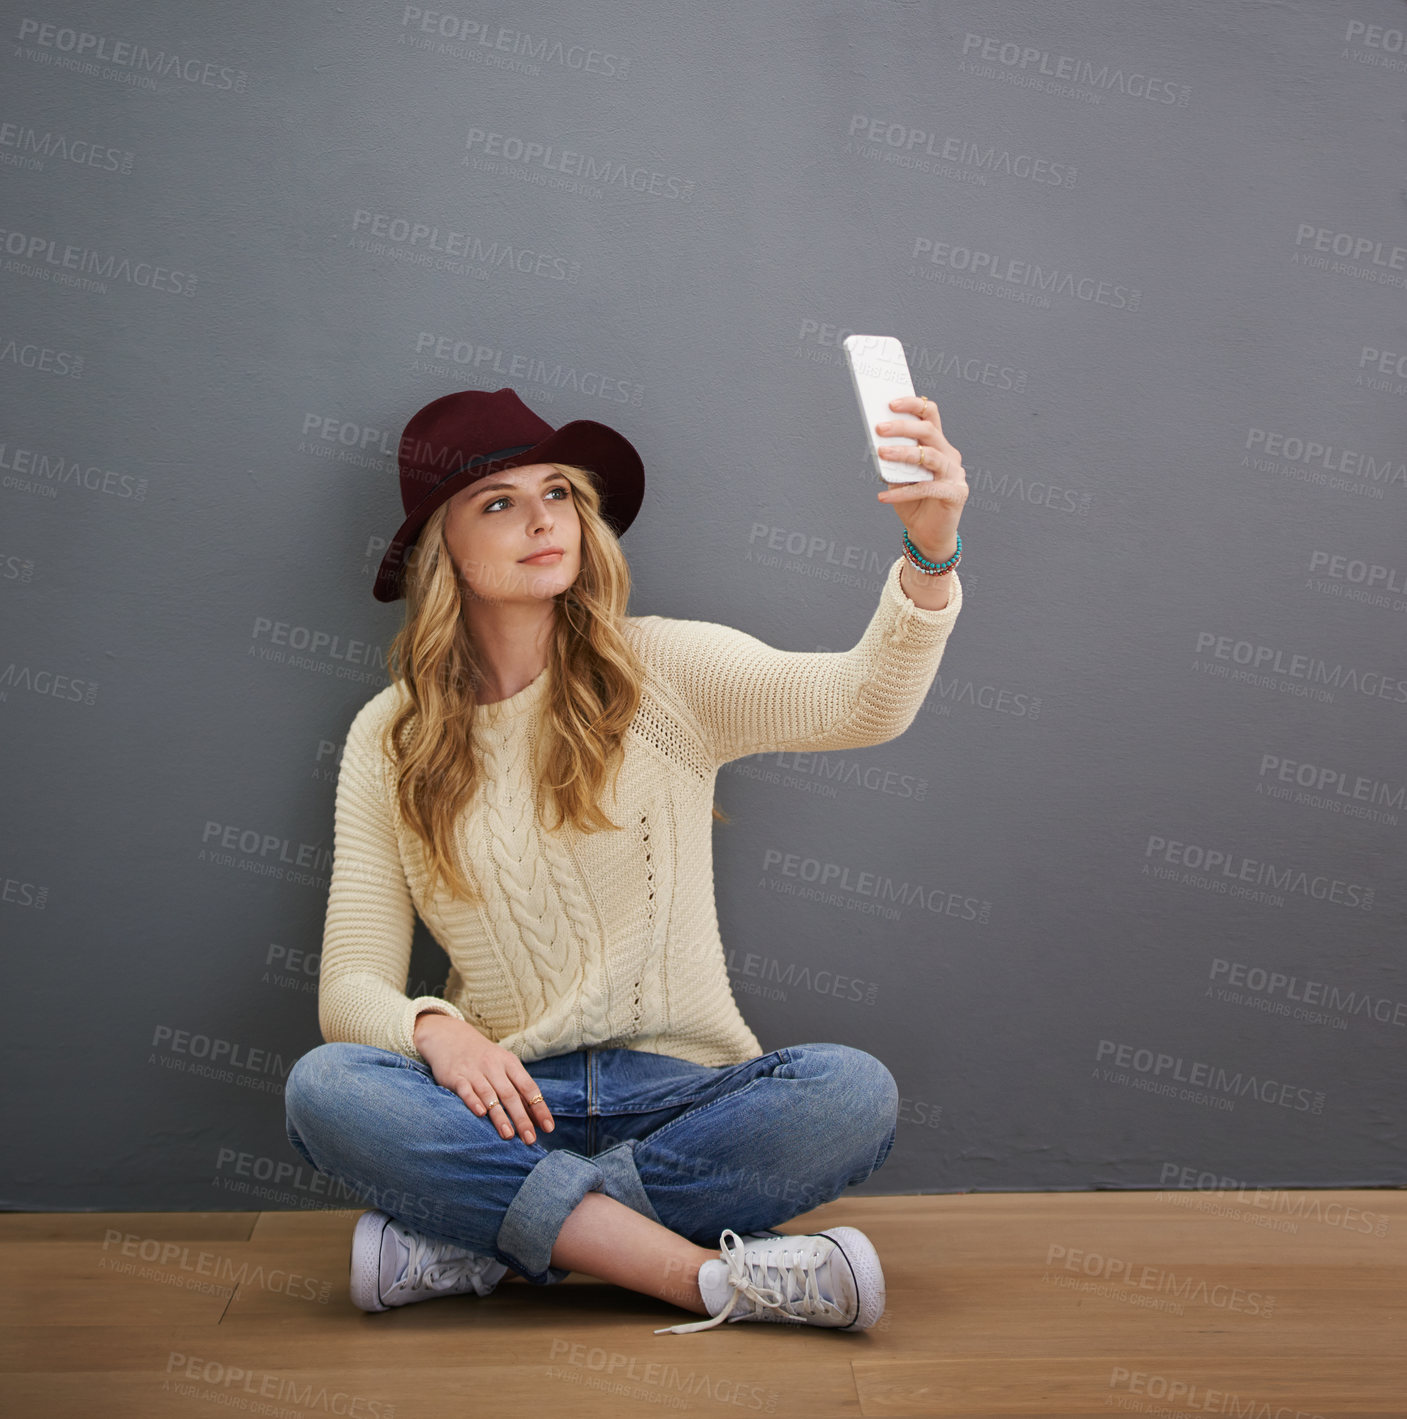 Buy stock photo Shot of a young woman using her cellphone while sitting against a gray background